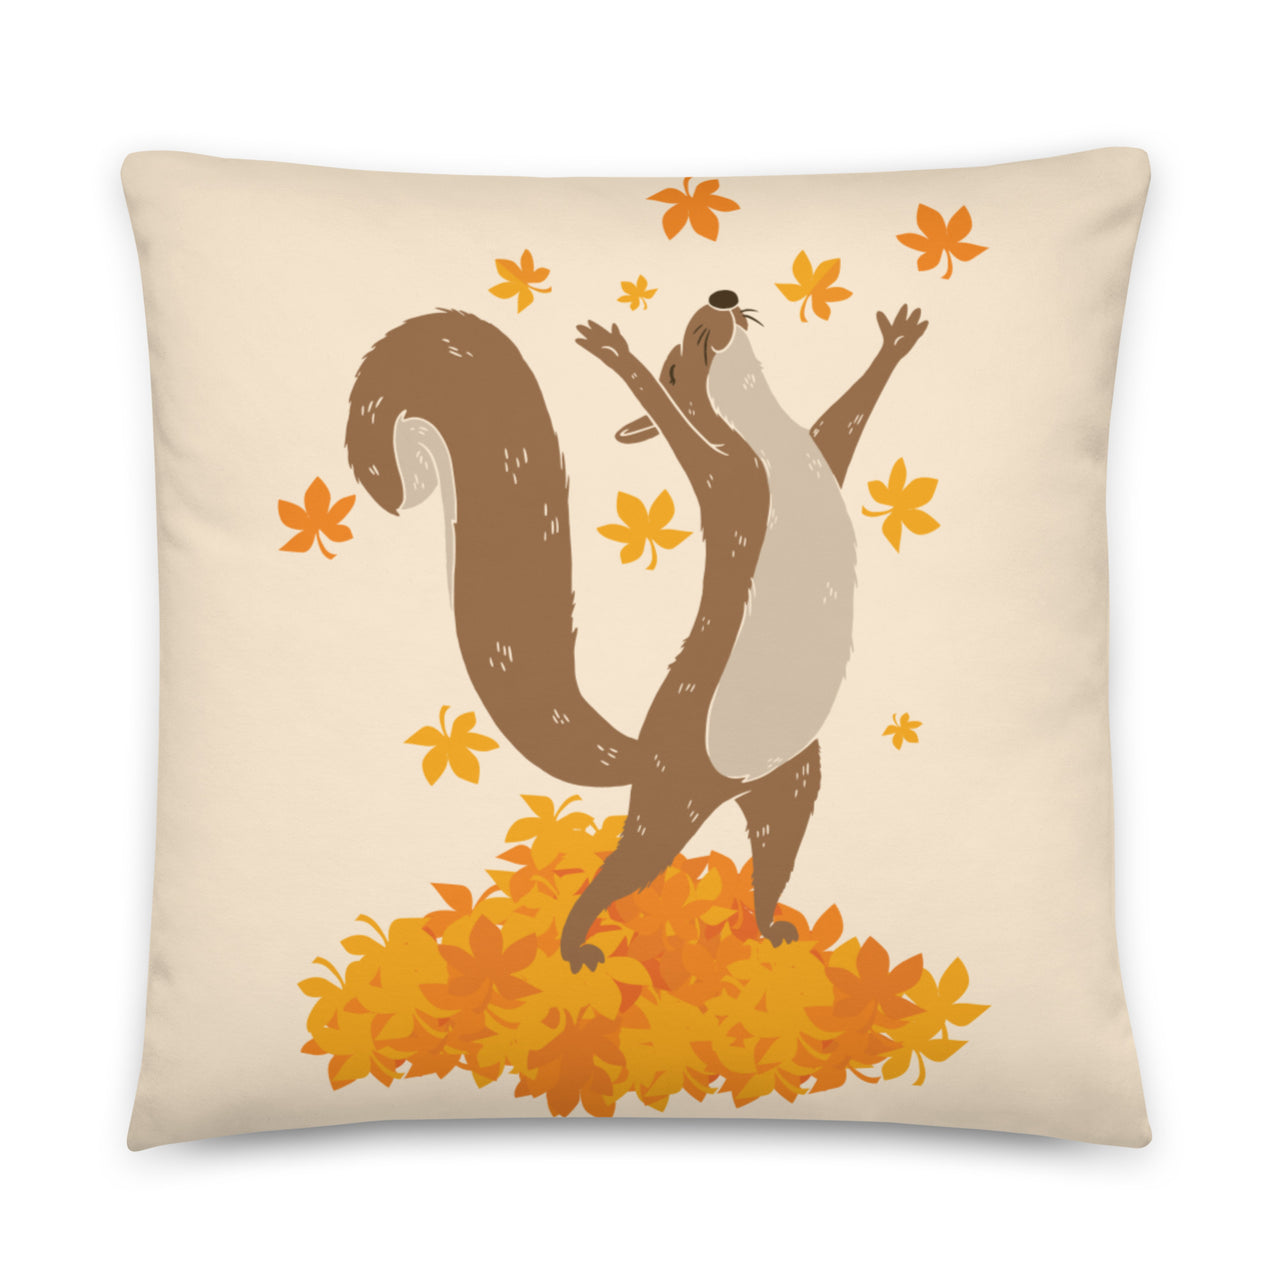 Squirrel Playing with Fall Leaves Pillow